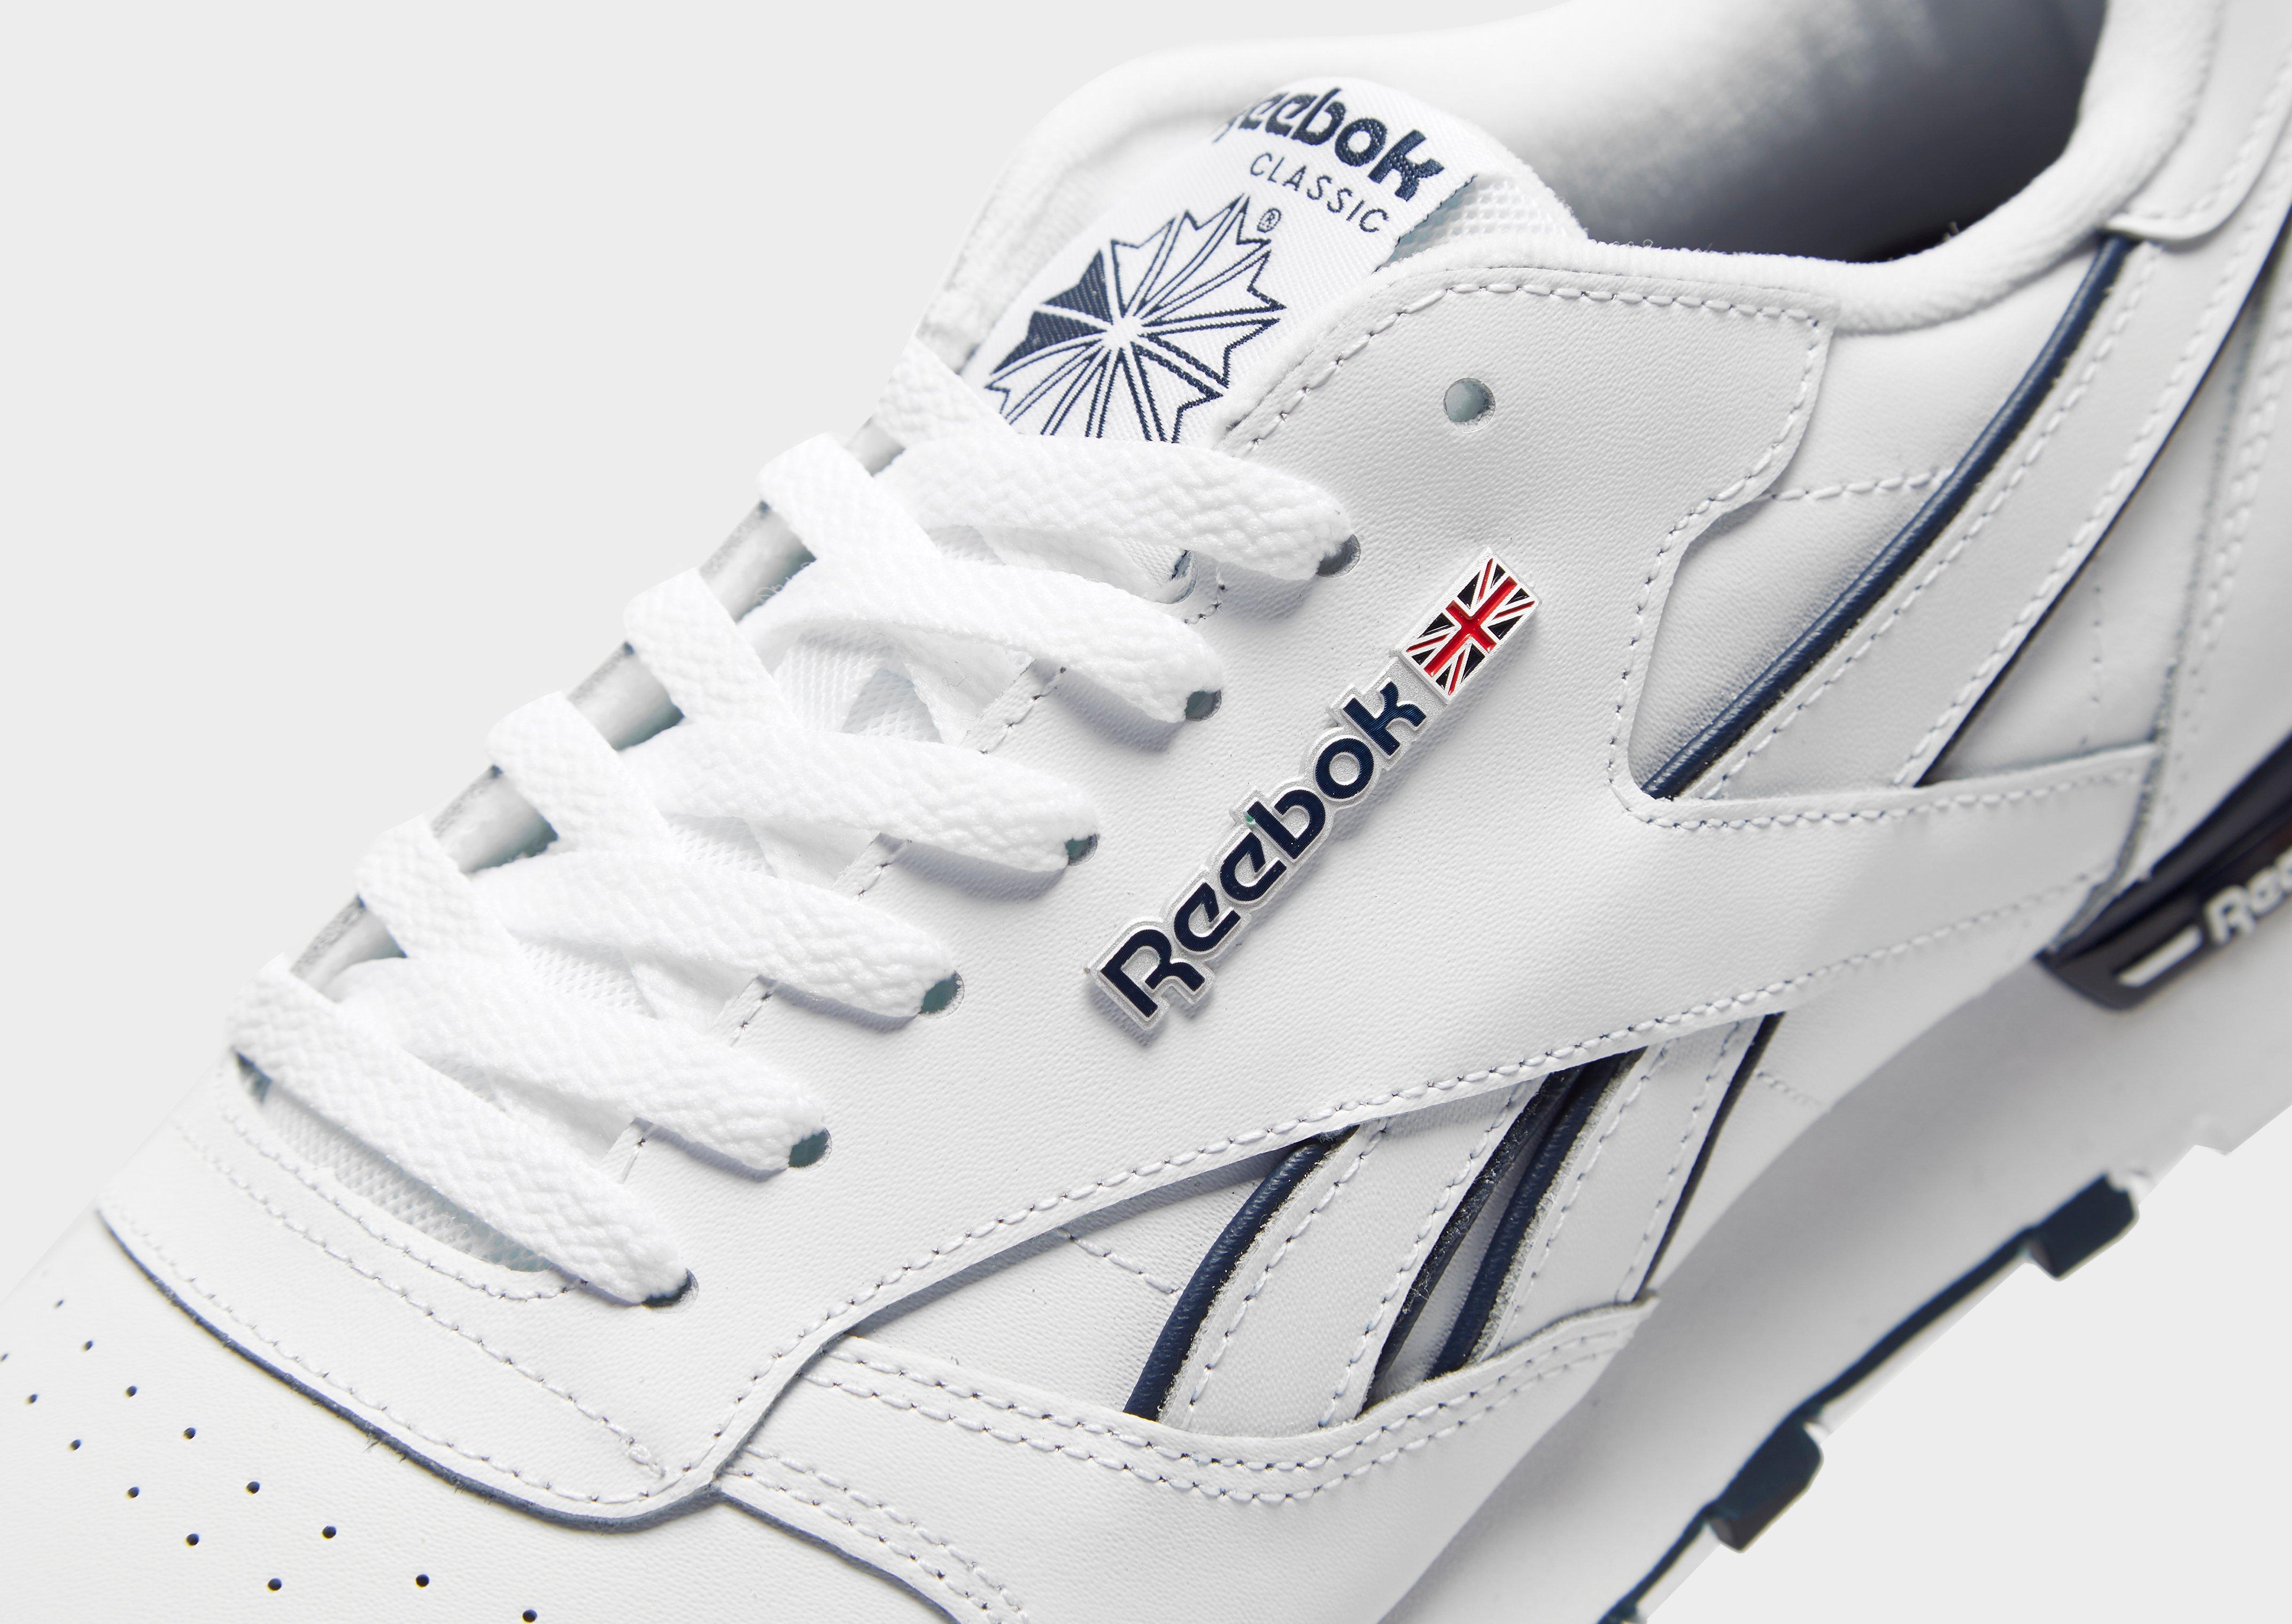 reebok classic leather clip trainers